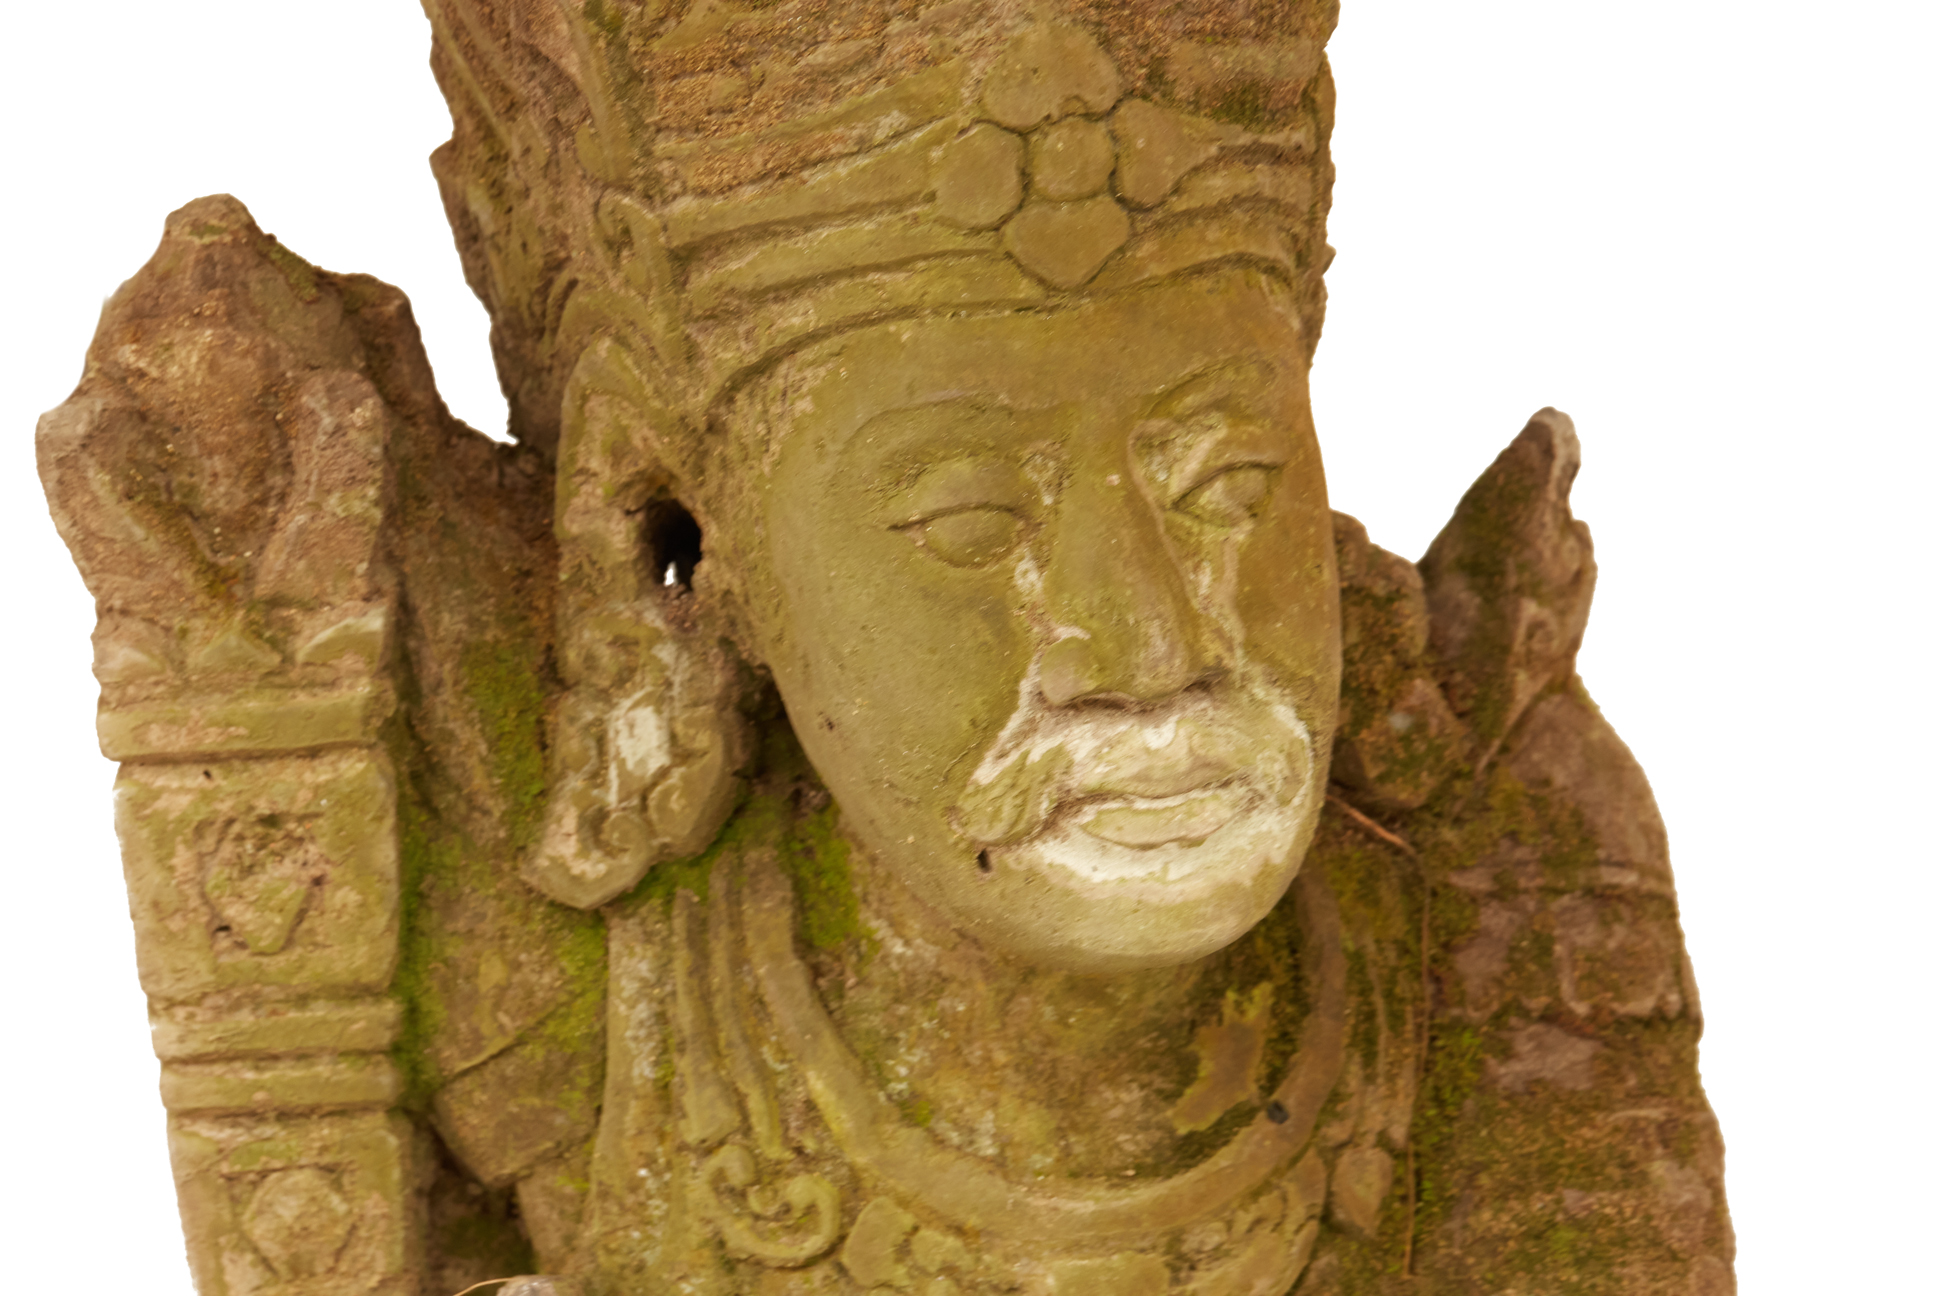 TWO BALINESE LAVA STONE FIGURES OF GODS (2) - Image 2 of 3